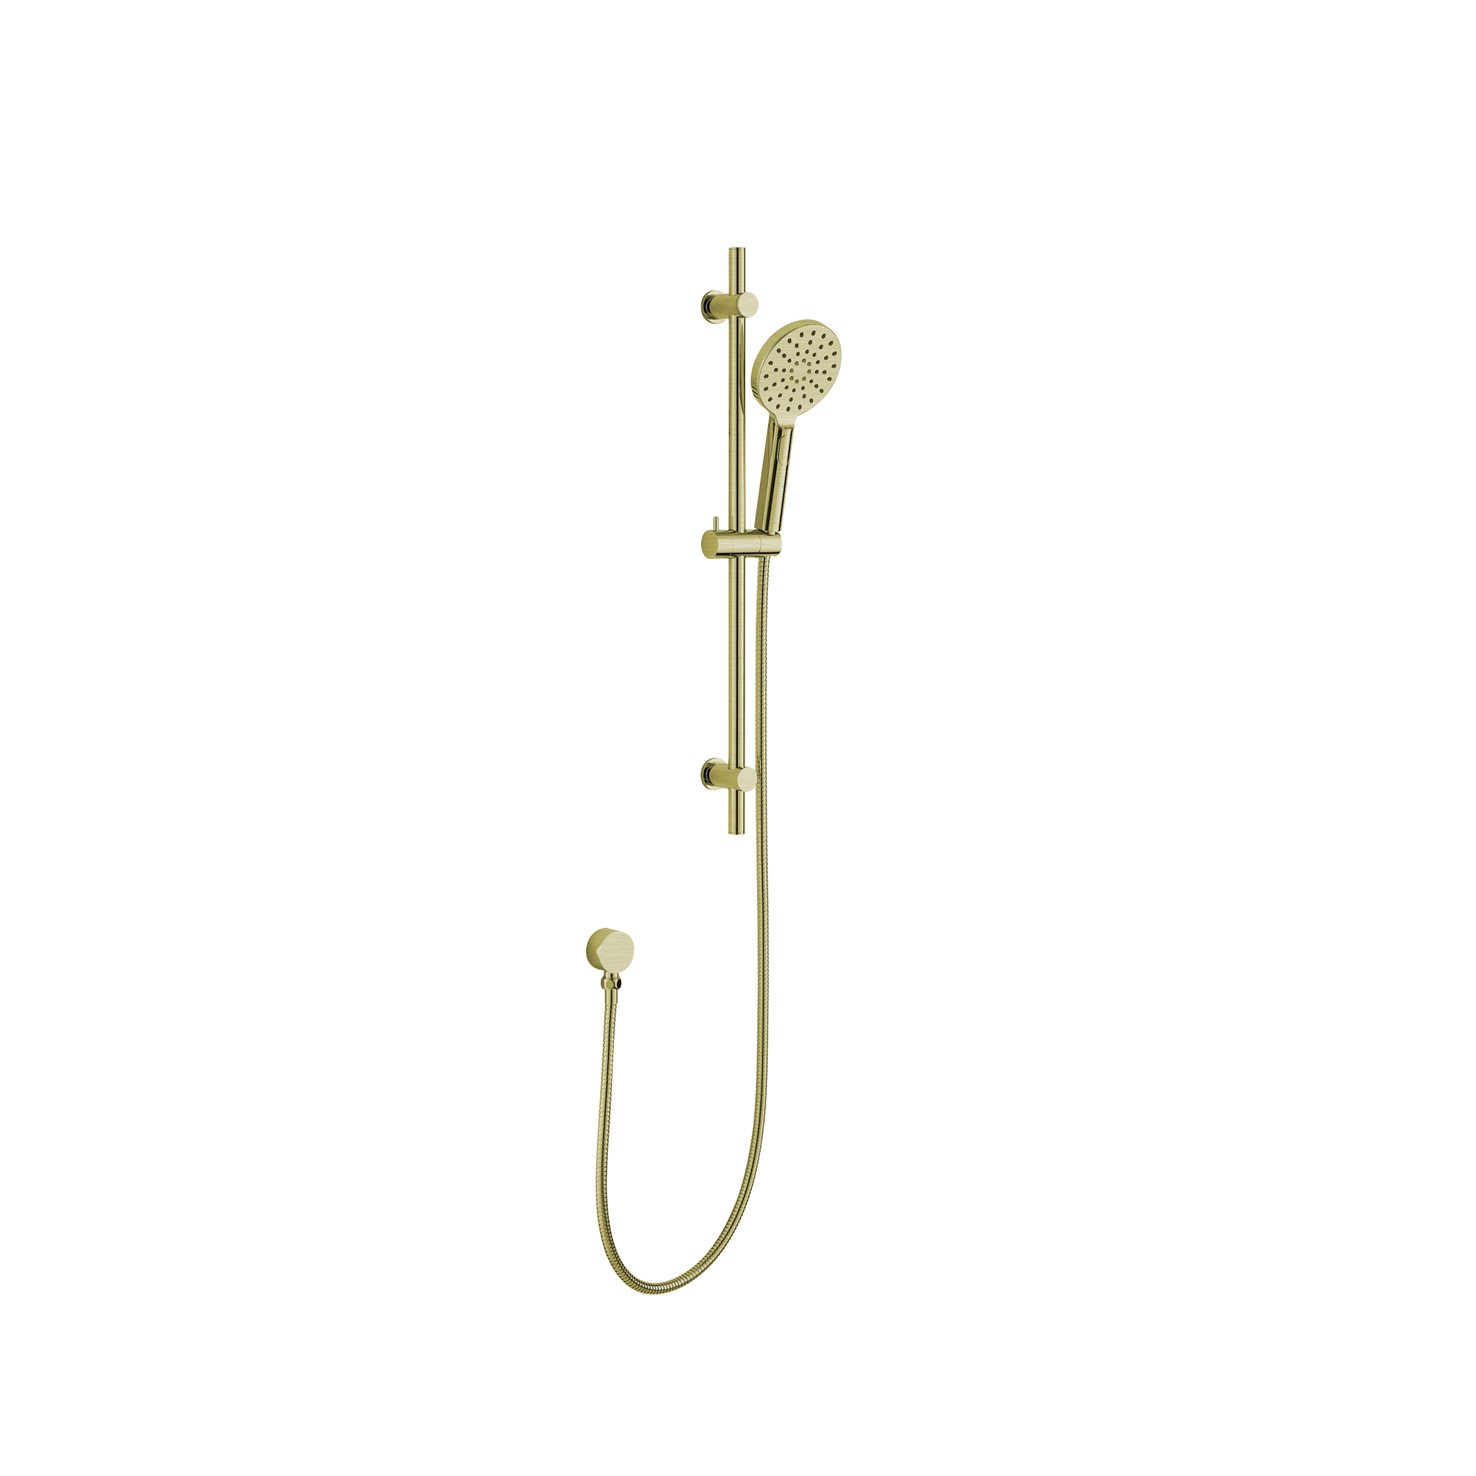 Ovia Milan Brushed Gold Hand Shower on Rail